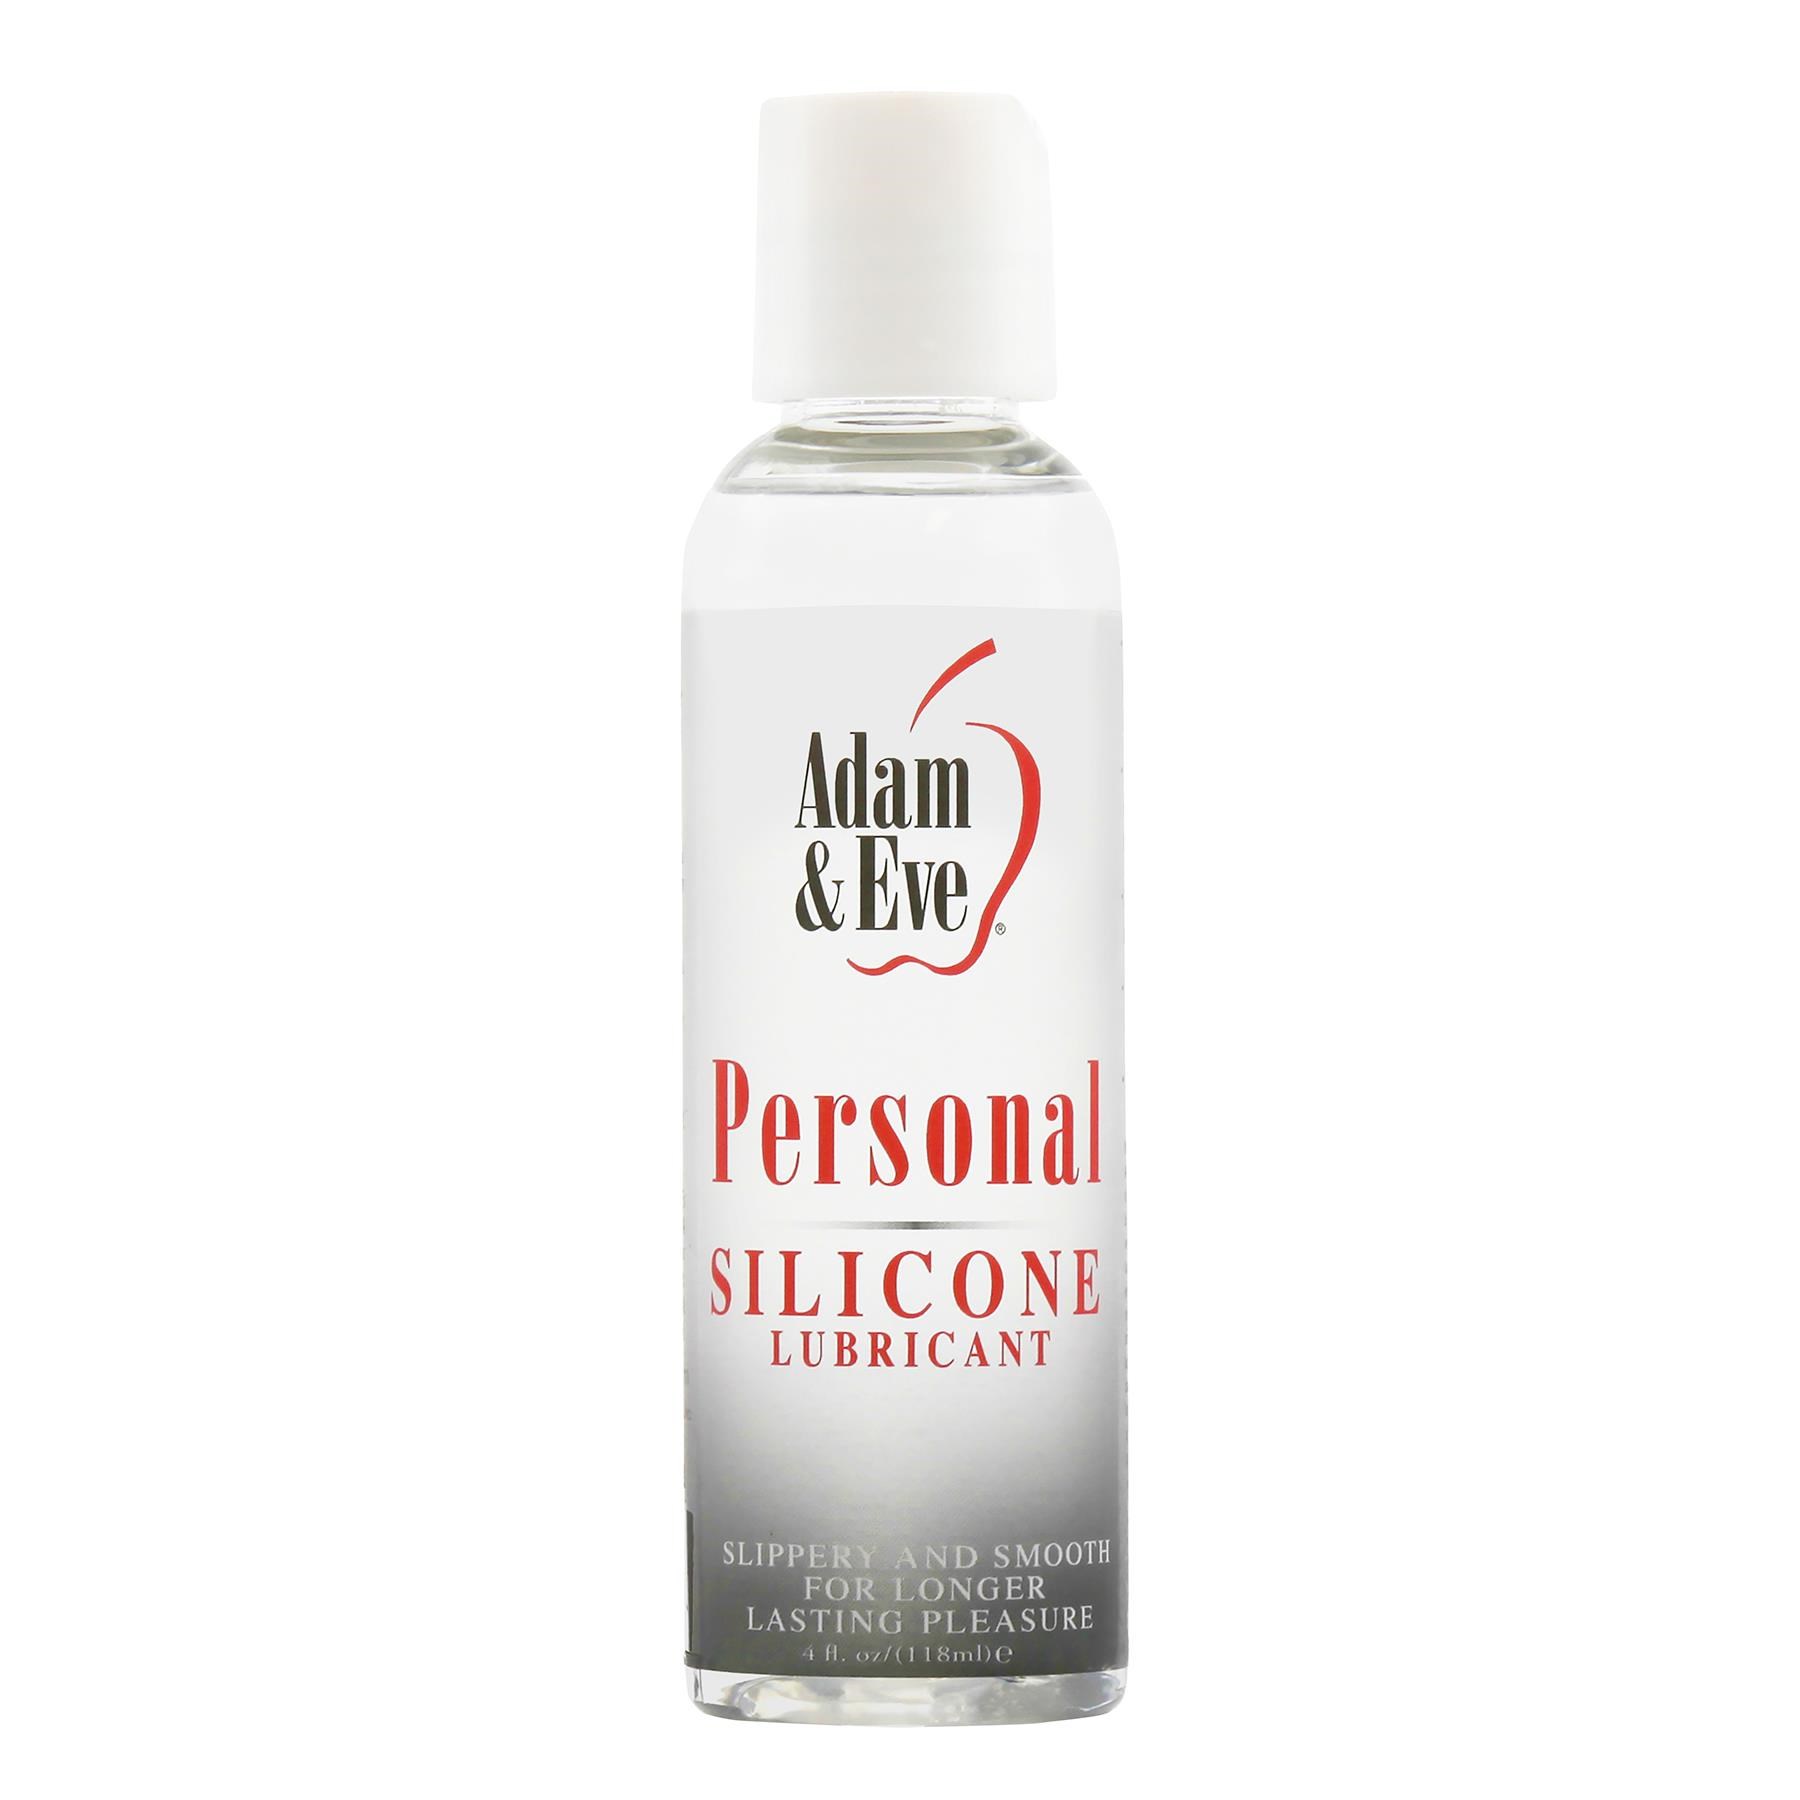 Adam & Eve Personal Silicone Lubricant 4 oz front of bottle